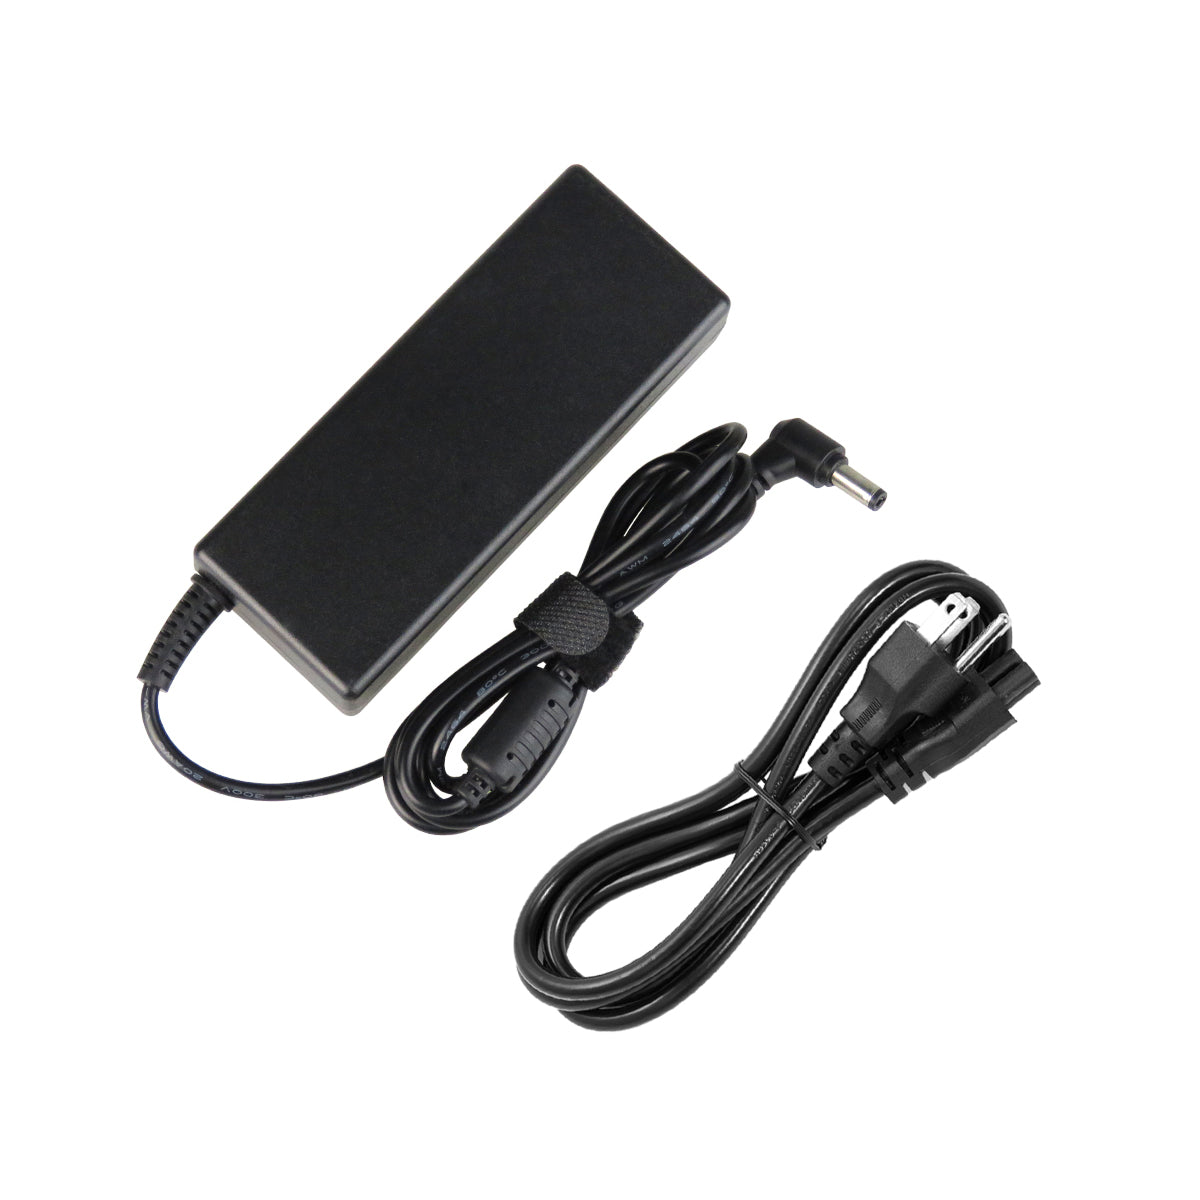 AC Adapter Charger for Gateway M-7300 Notebook.